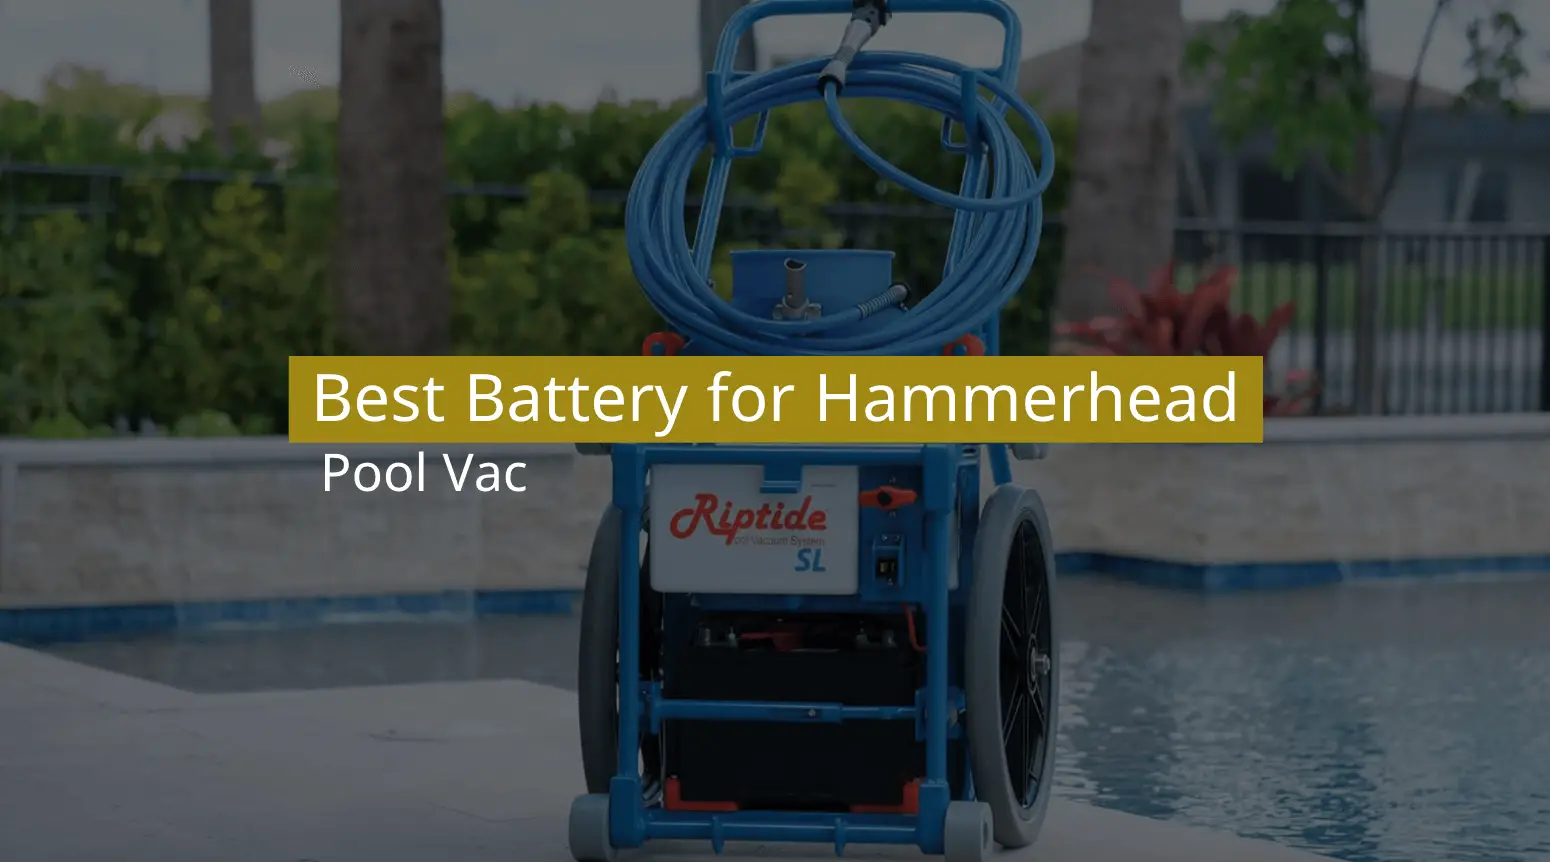 Best Battery for Hammerhead Pool Vac in 2022 - Our Top 5 Picks